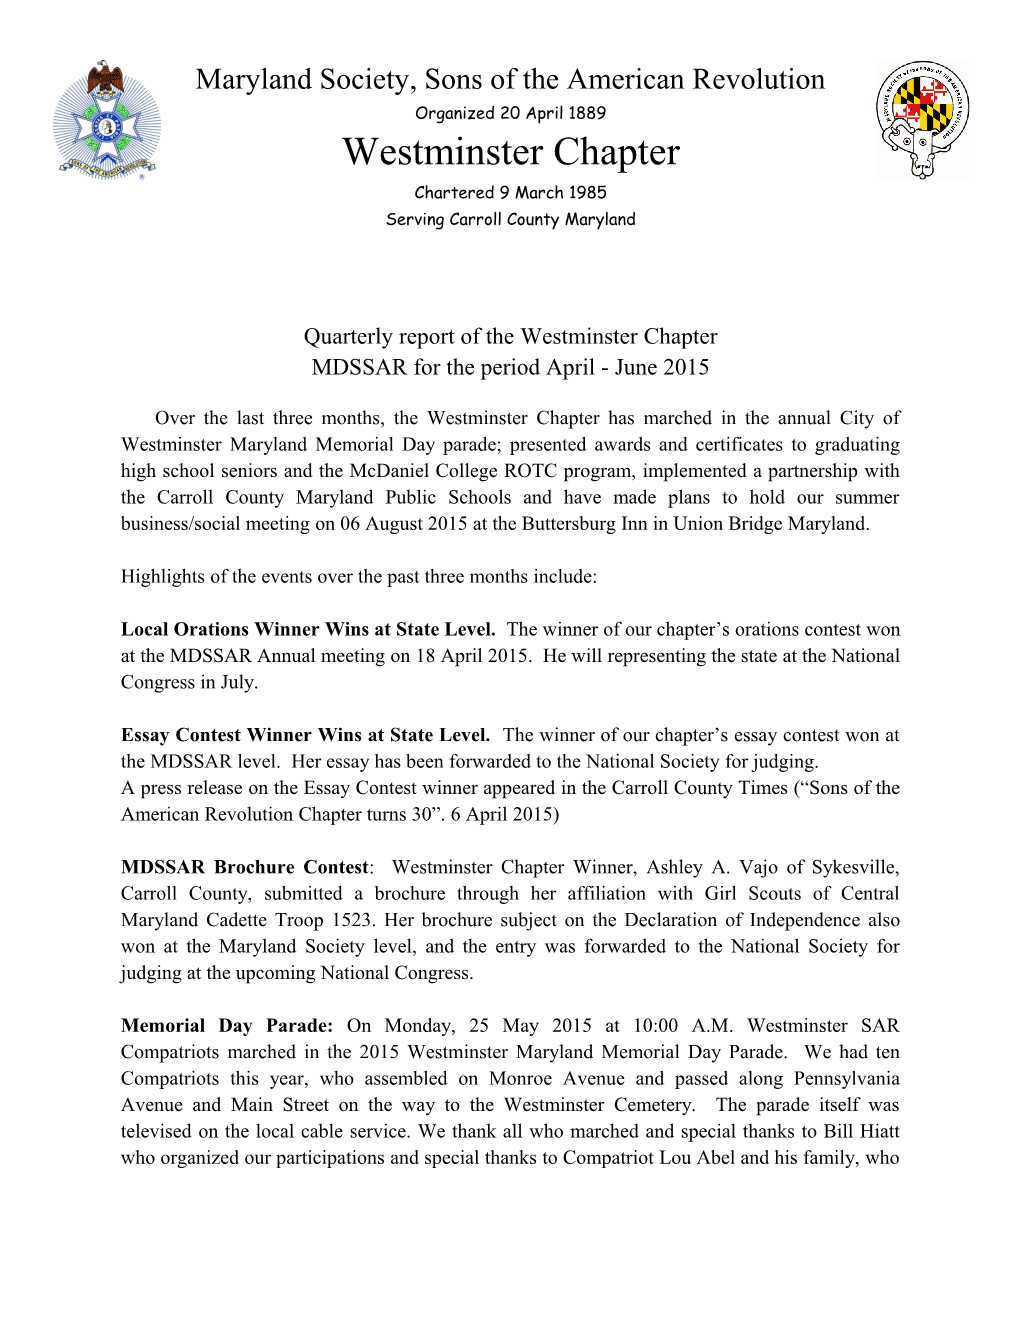 Quarterly Report of the Westminster Chapter